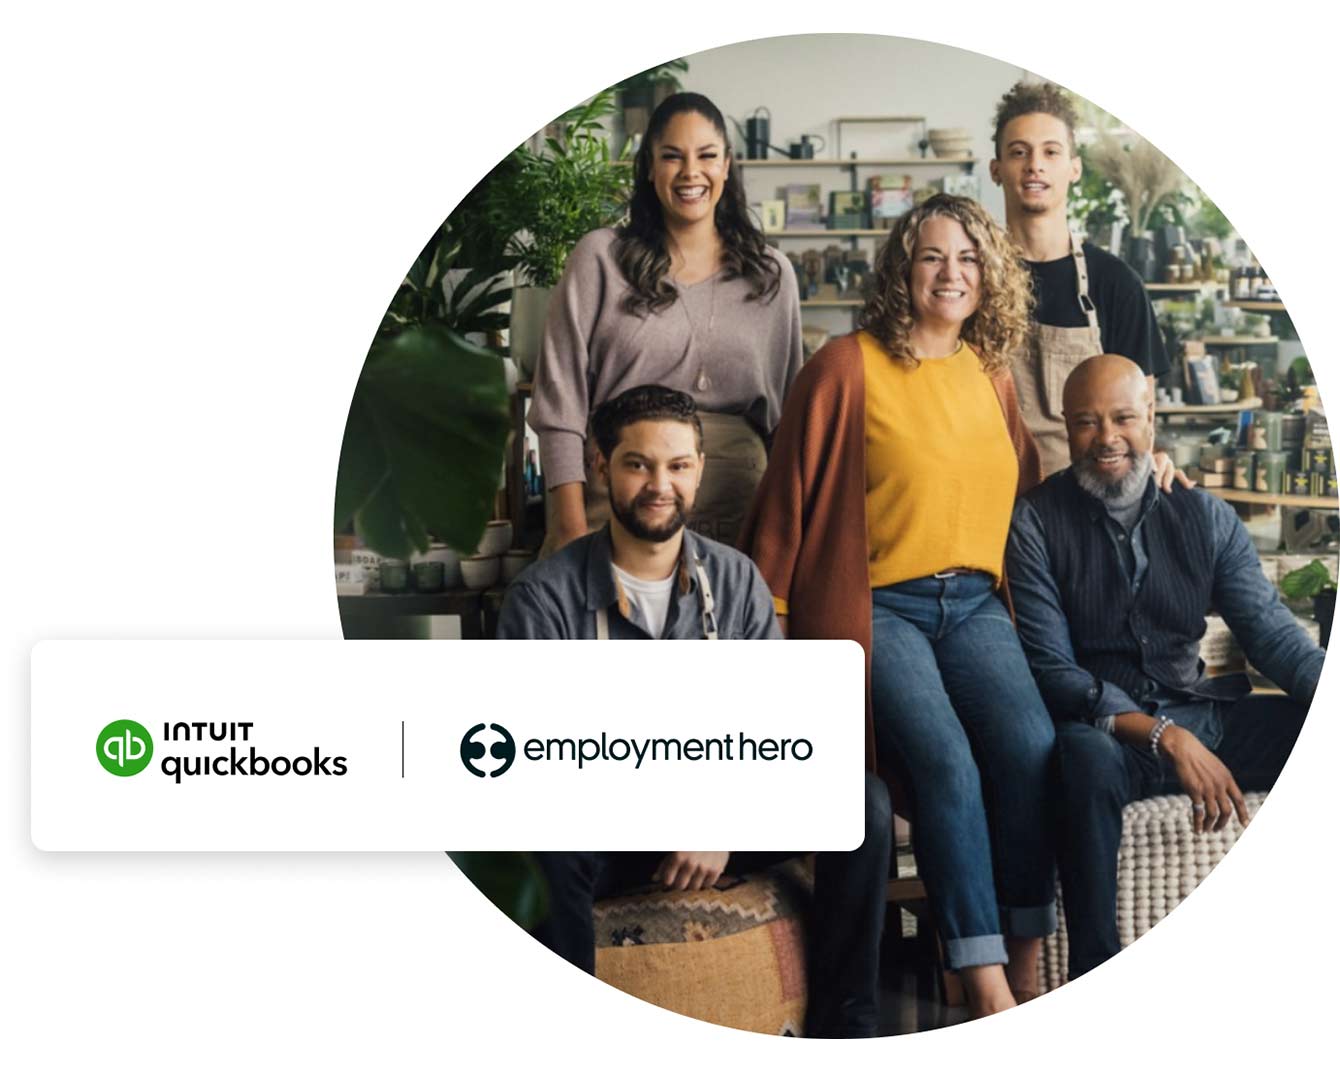 A group of workers sat together with preview of QuickBooks and Employment Hero logos displayed